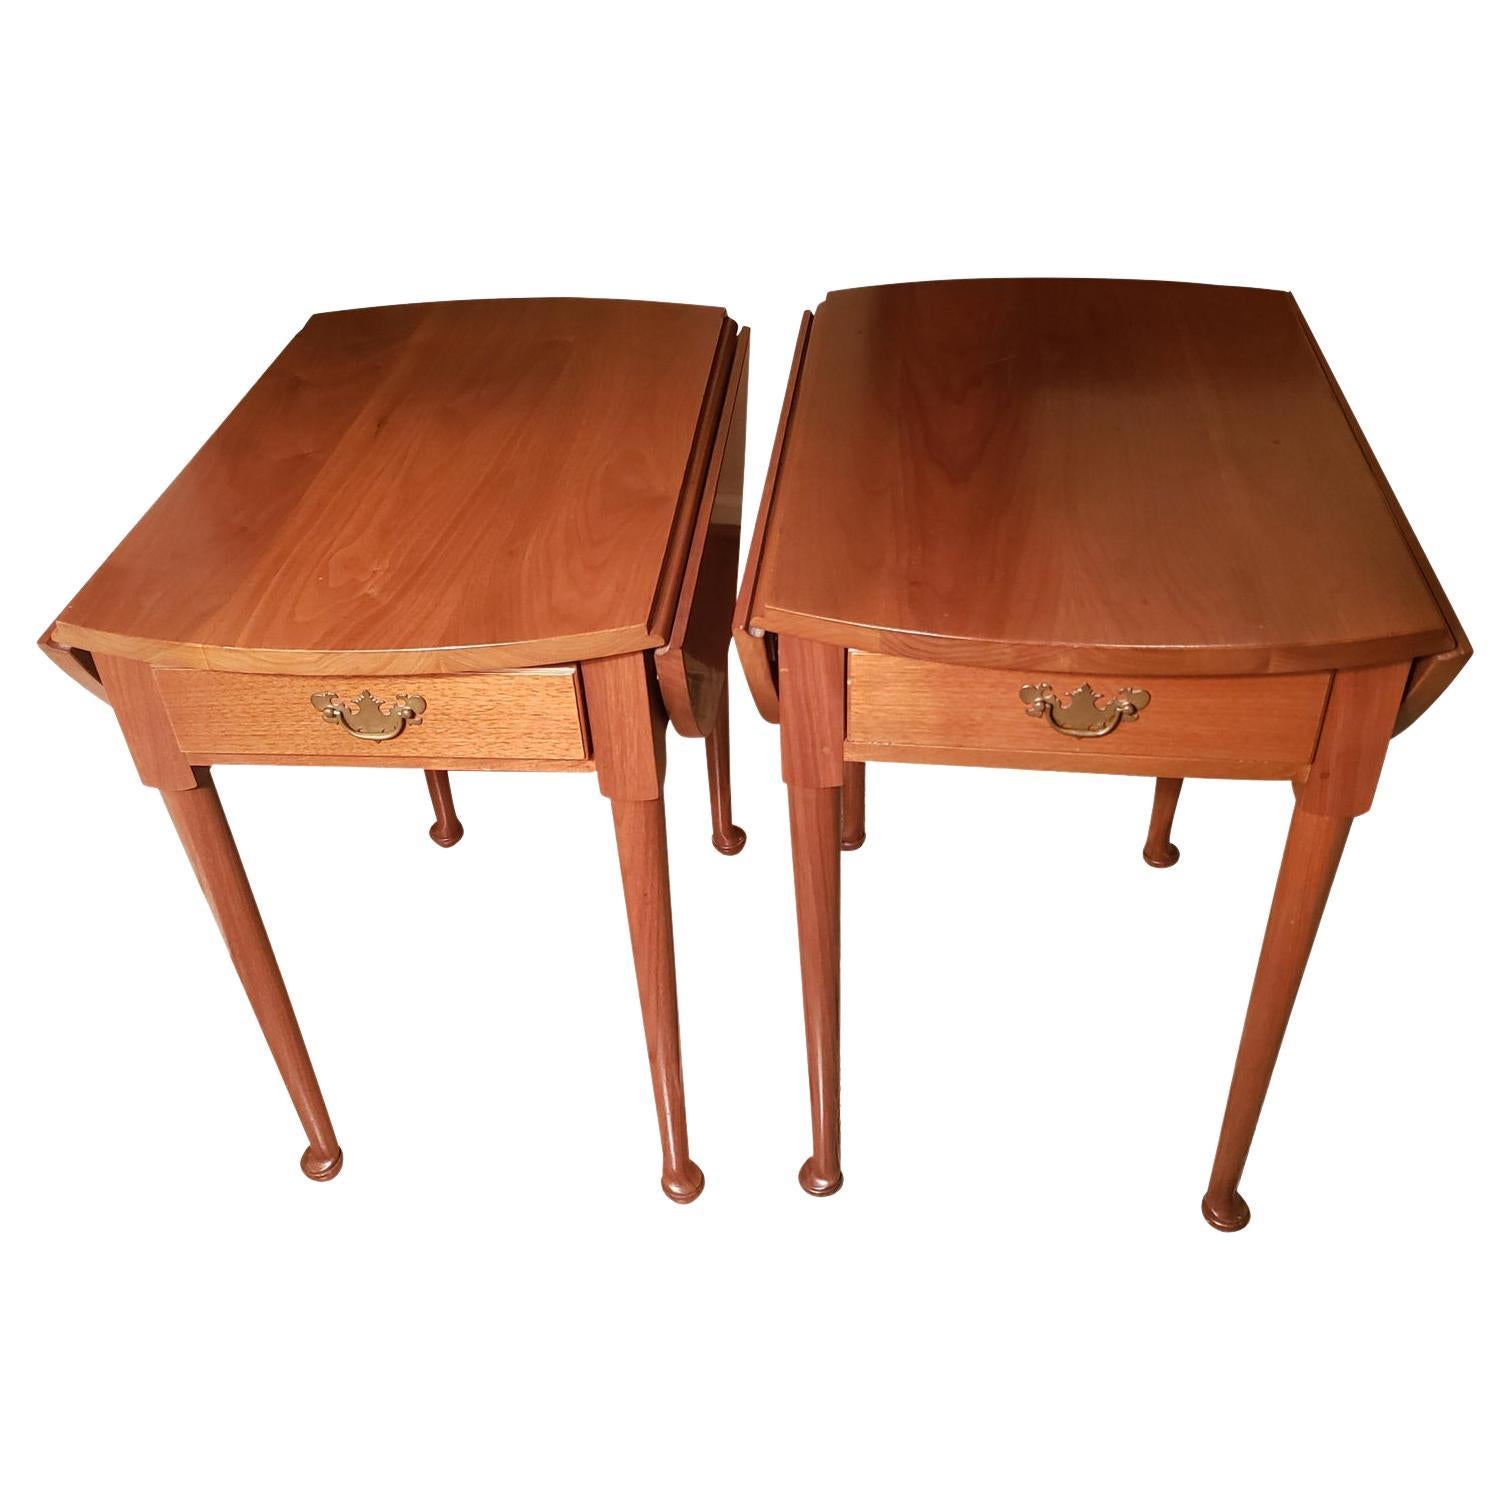 1970s Suters Hepplewhite Pembroke Drop-Leaves Oval Cherry Side Tables For Sale